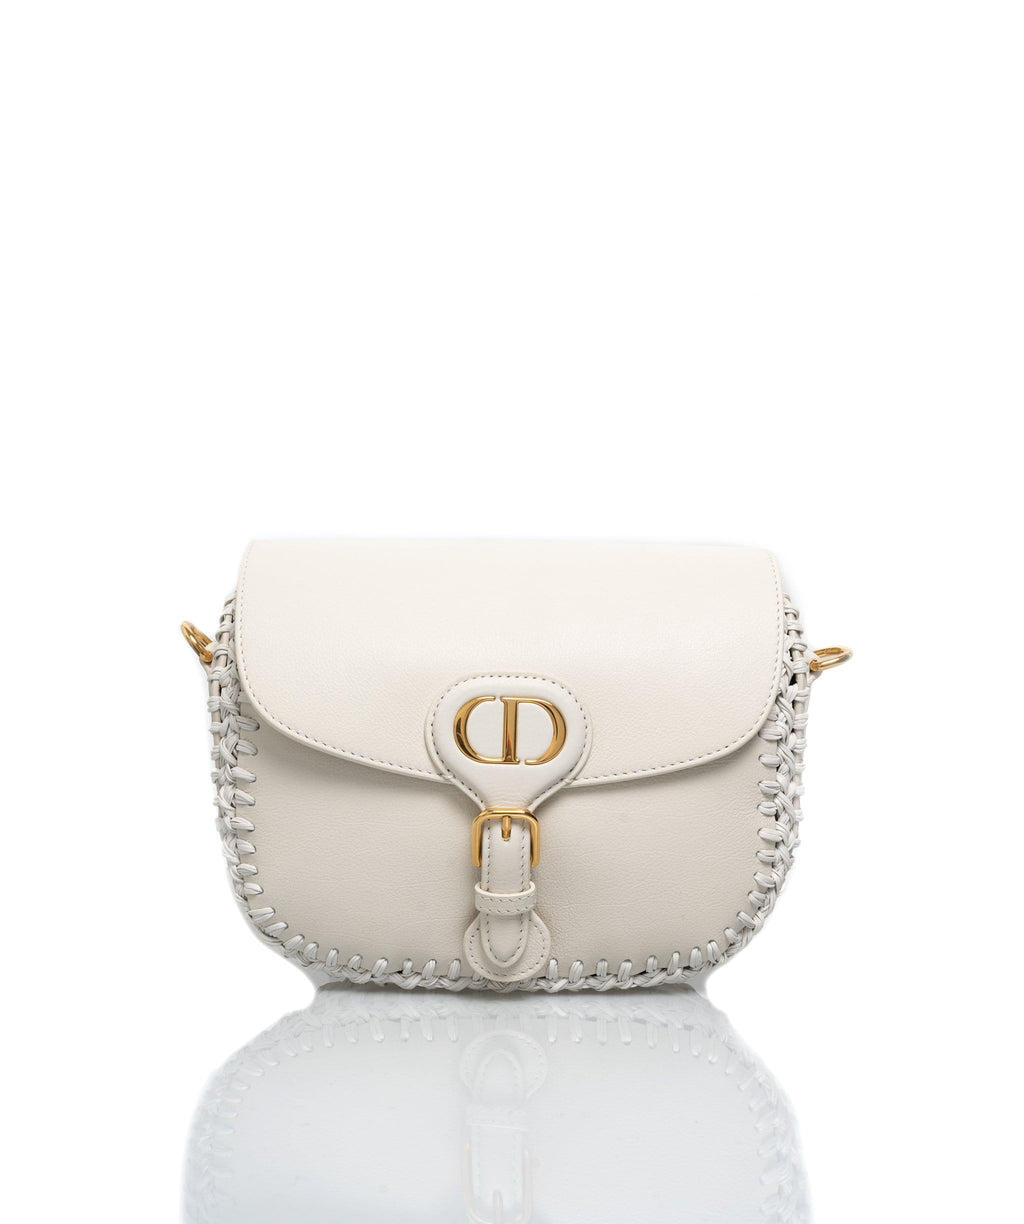 Medium Lady DLite Bag White DLace Embroidery with 3D Macramé Effect  DIOR